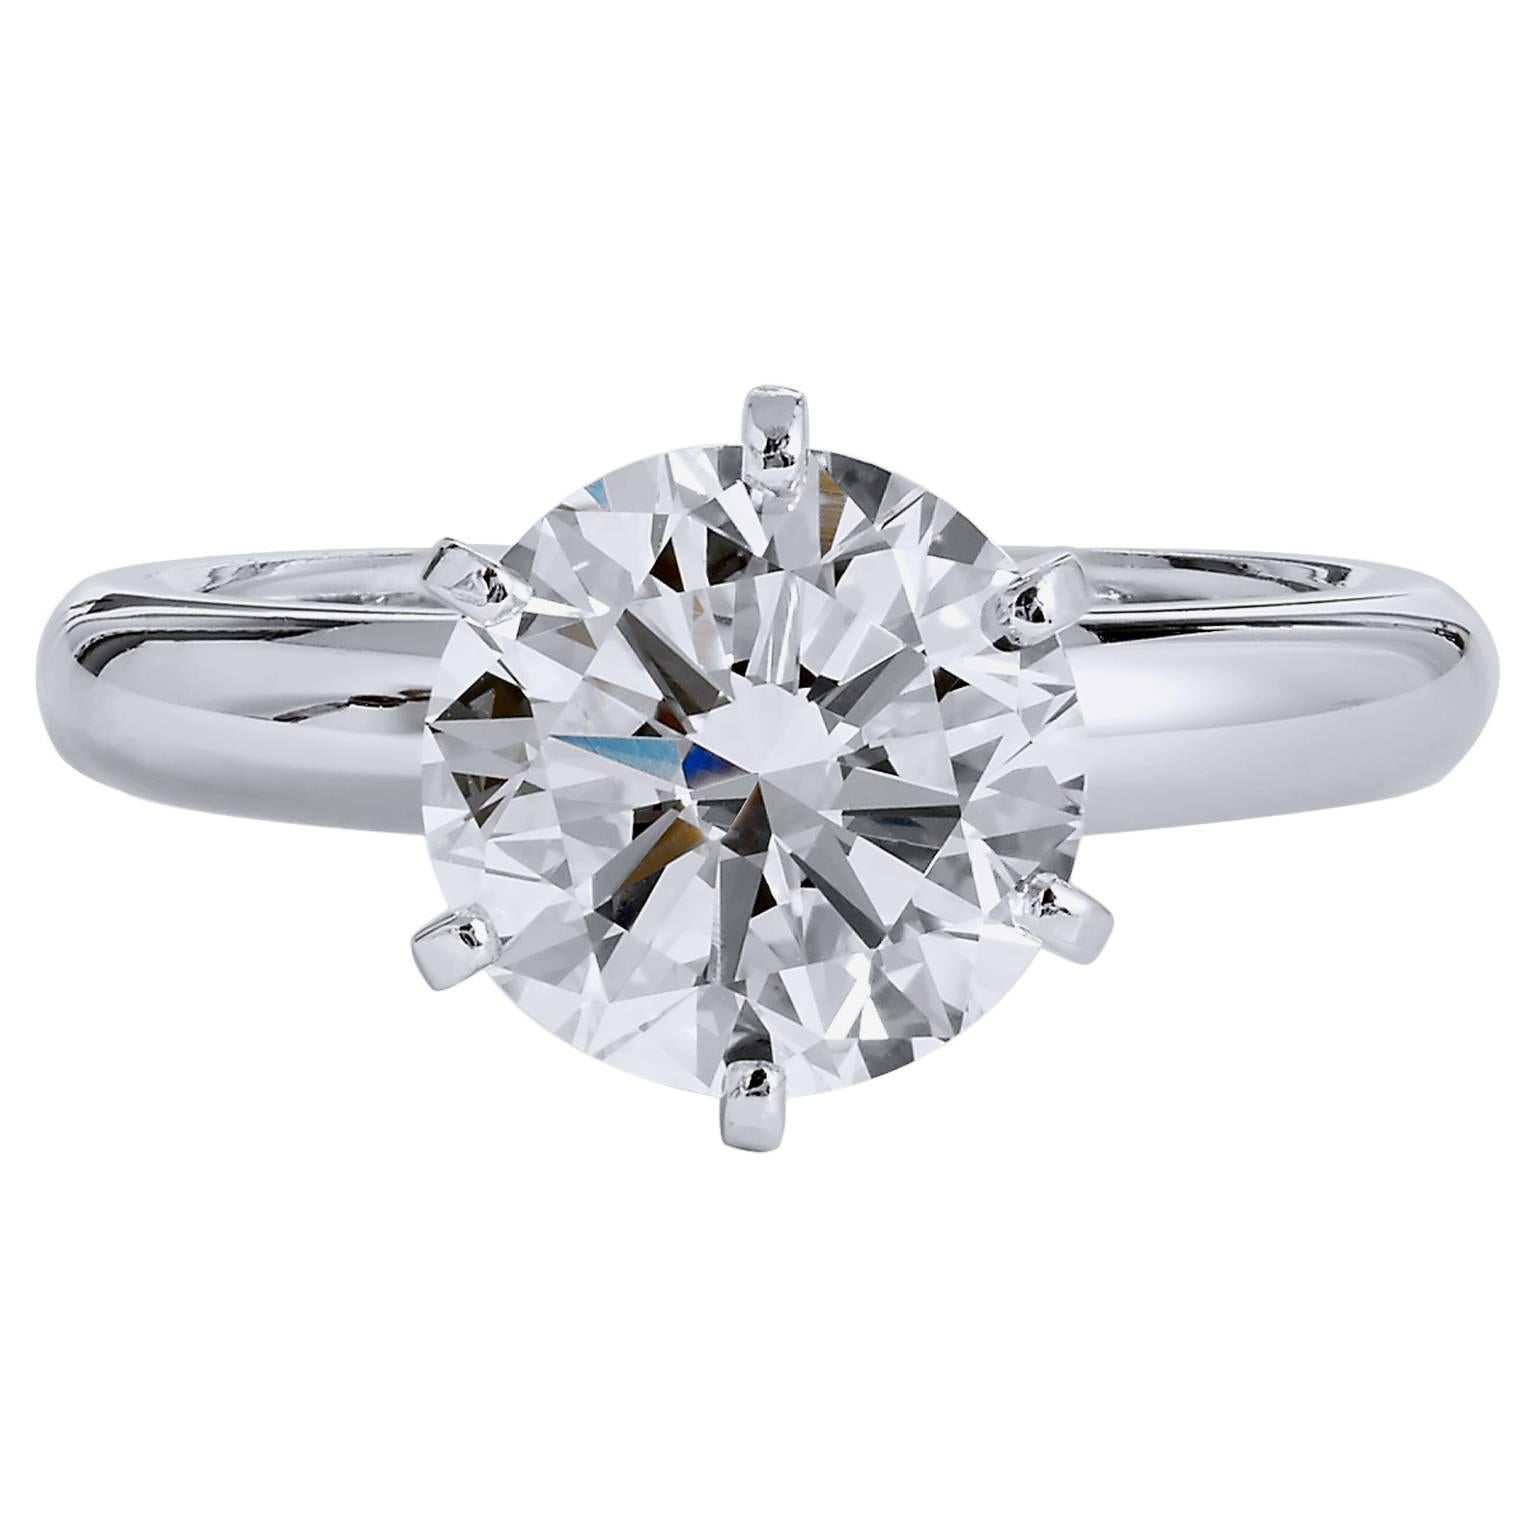 GIA Certified 3.04 Carat Diamond Platinum 4 Prong Solitaire Engagement Ring